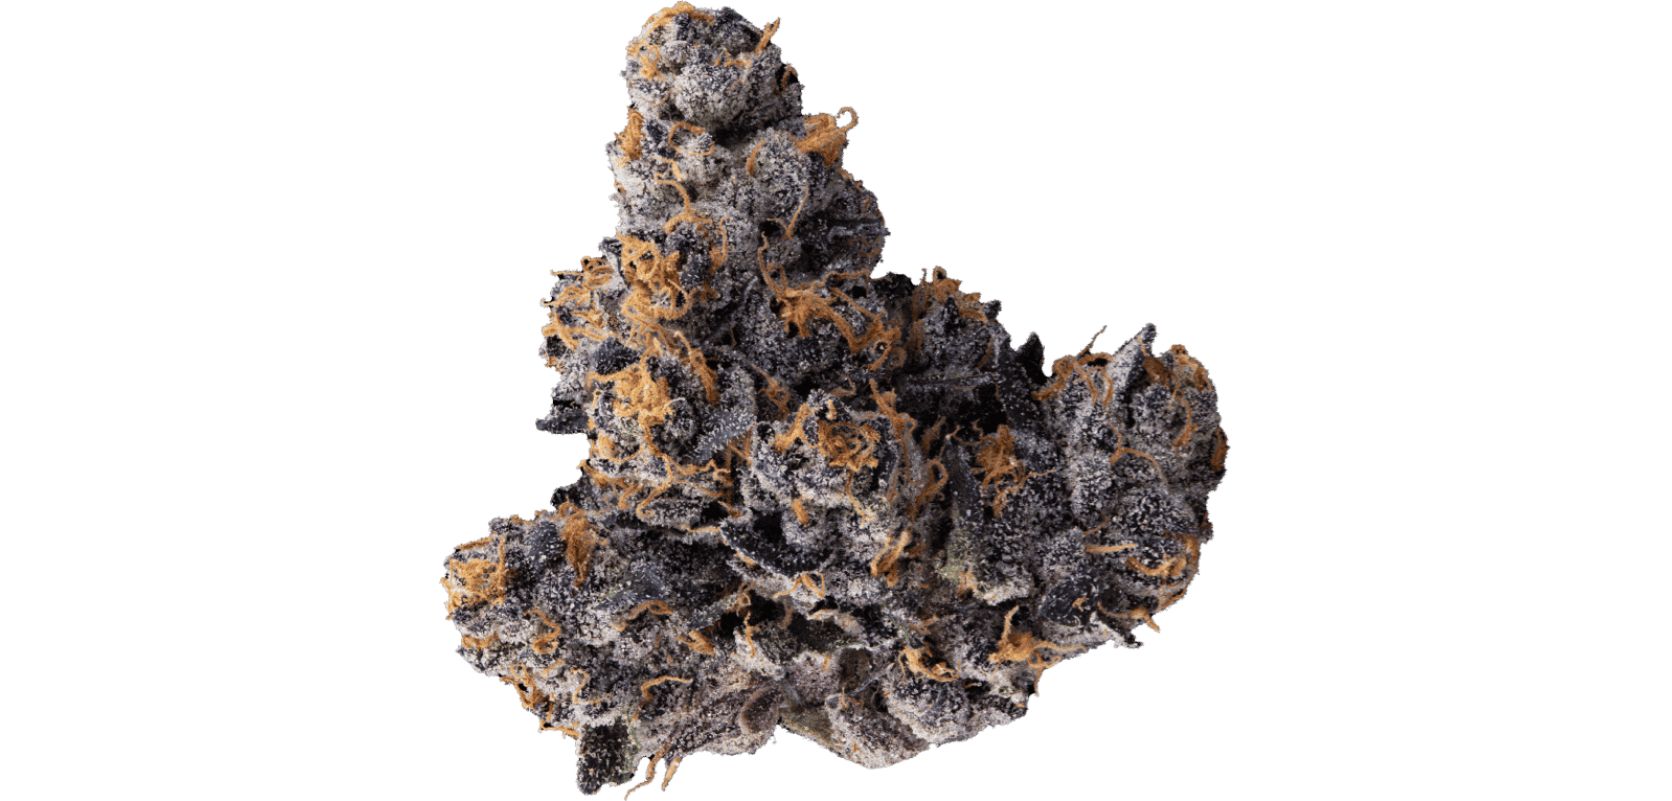 Jealousy strain is a hybrid cross between two potent cannabis buds, Sherbert BX1 and Gelato 41. The choice of the two parent strains may help you predict the taste and effects this bud produces.